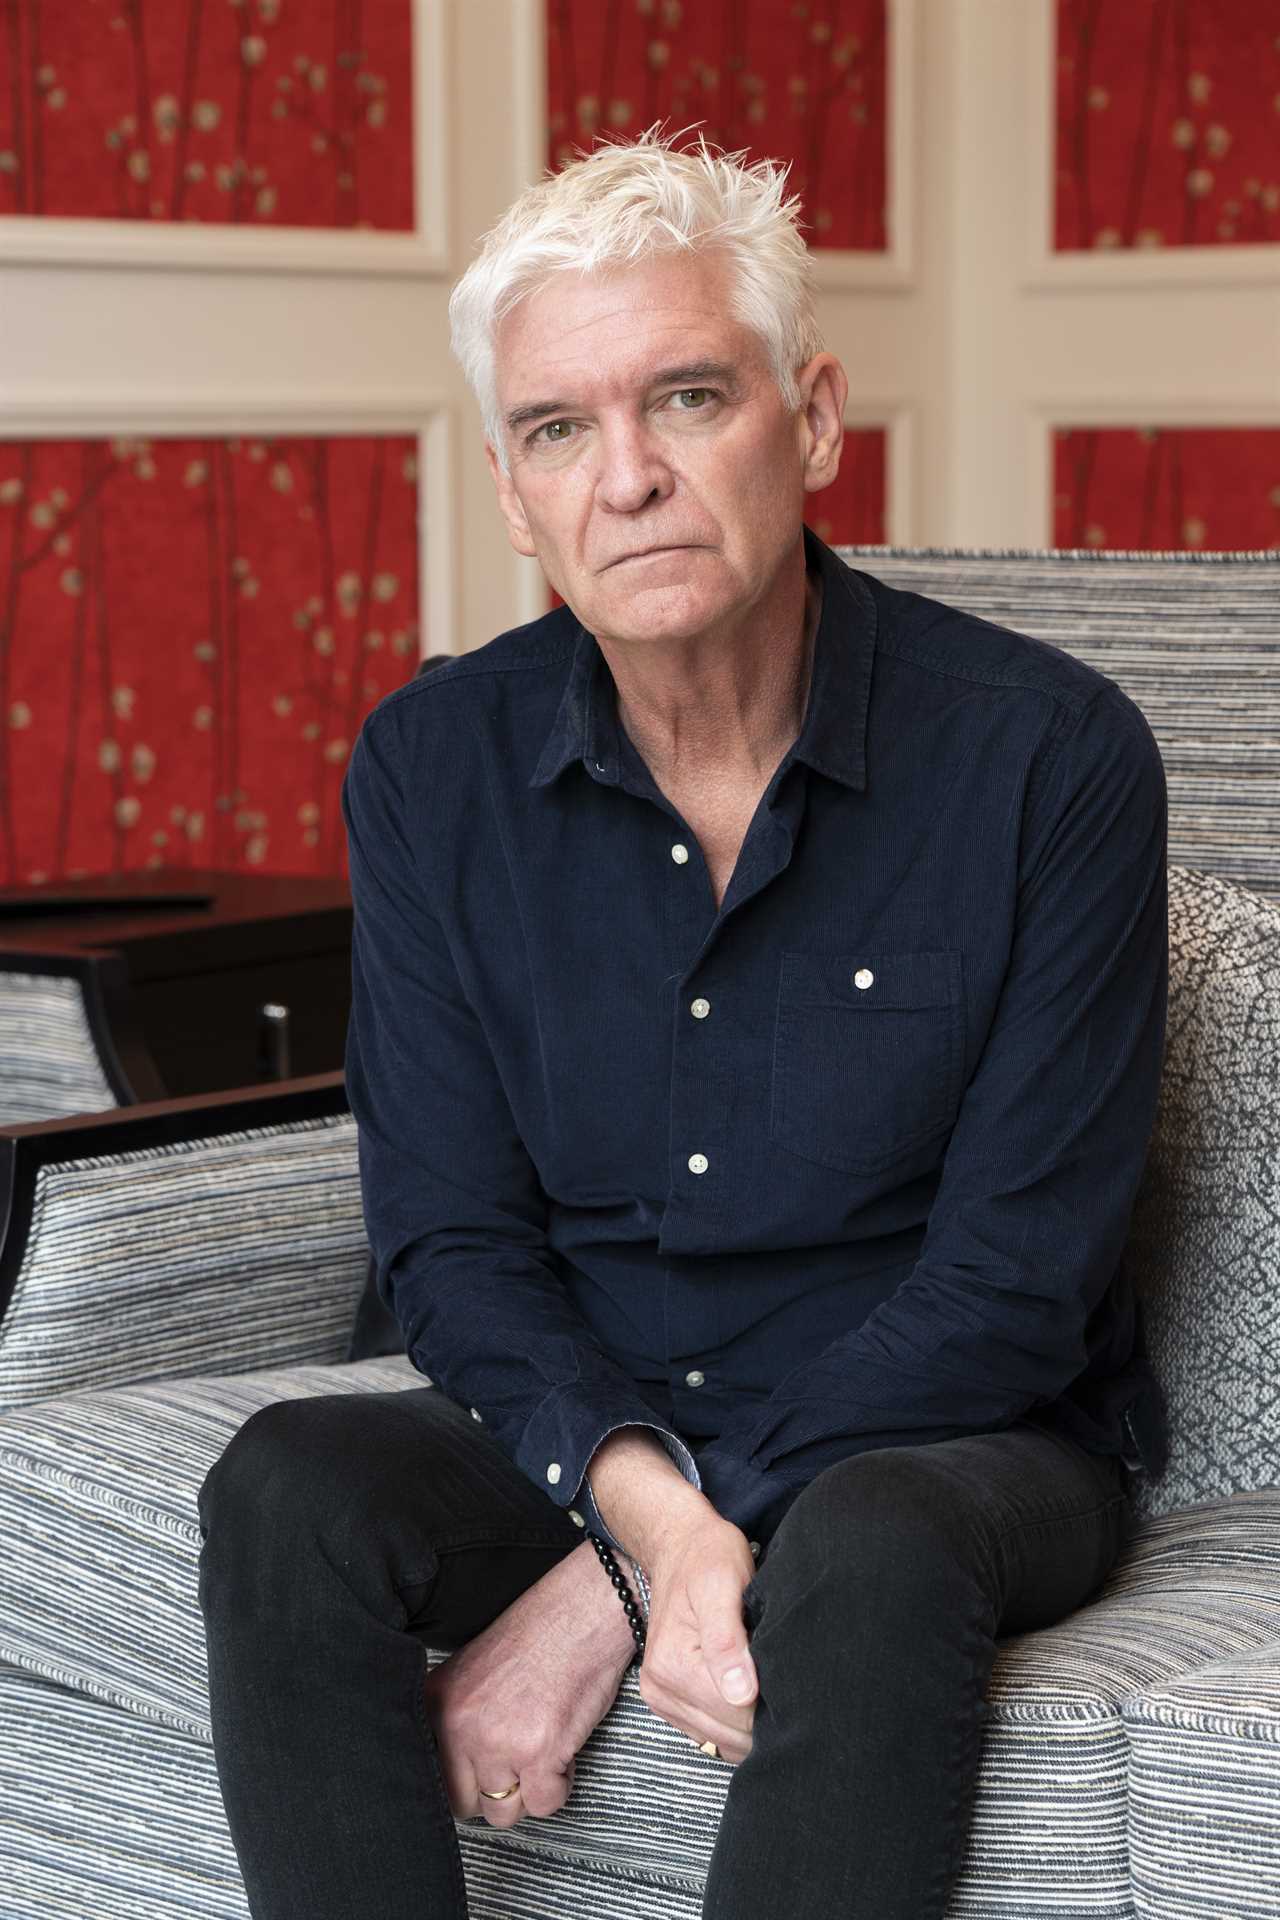 ITV offers to pay for therapy for This Morning employees to help them deal with fallout from Phillip Schofield scandal